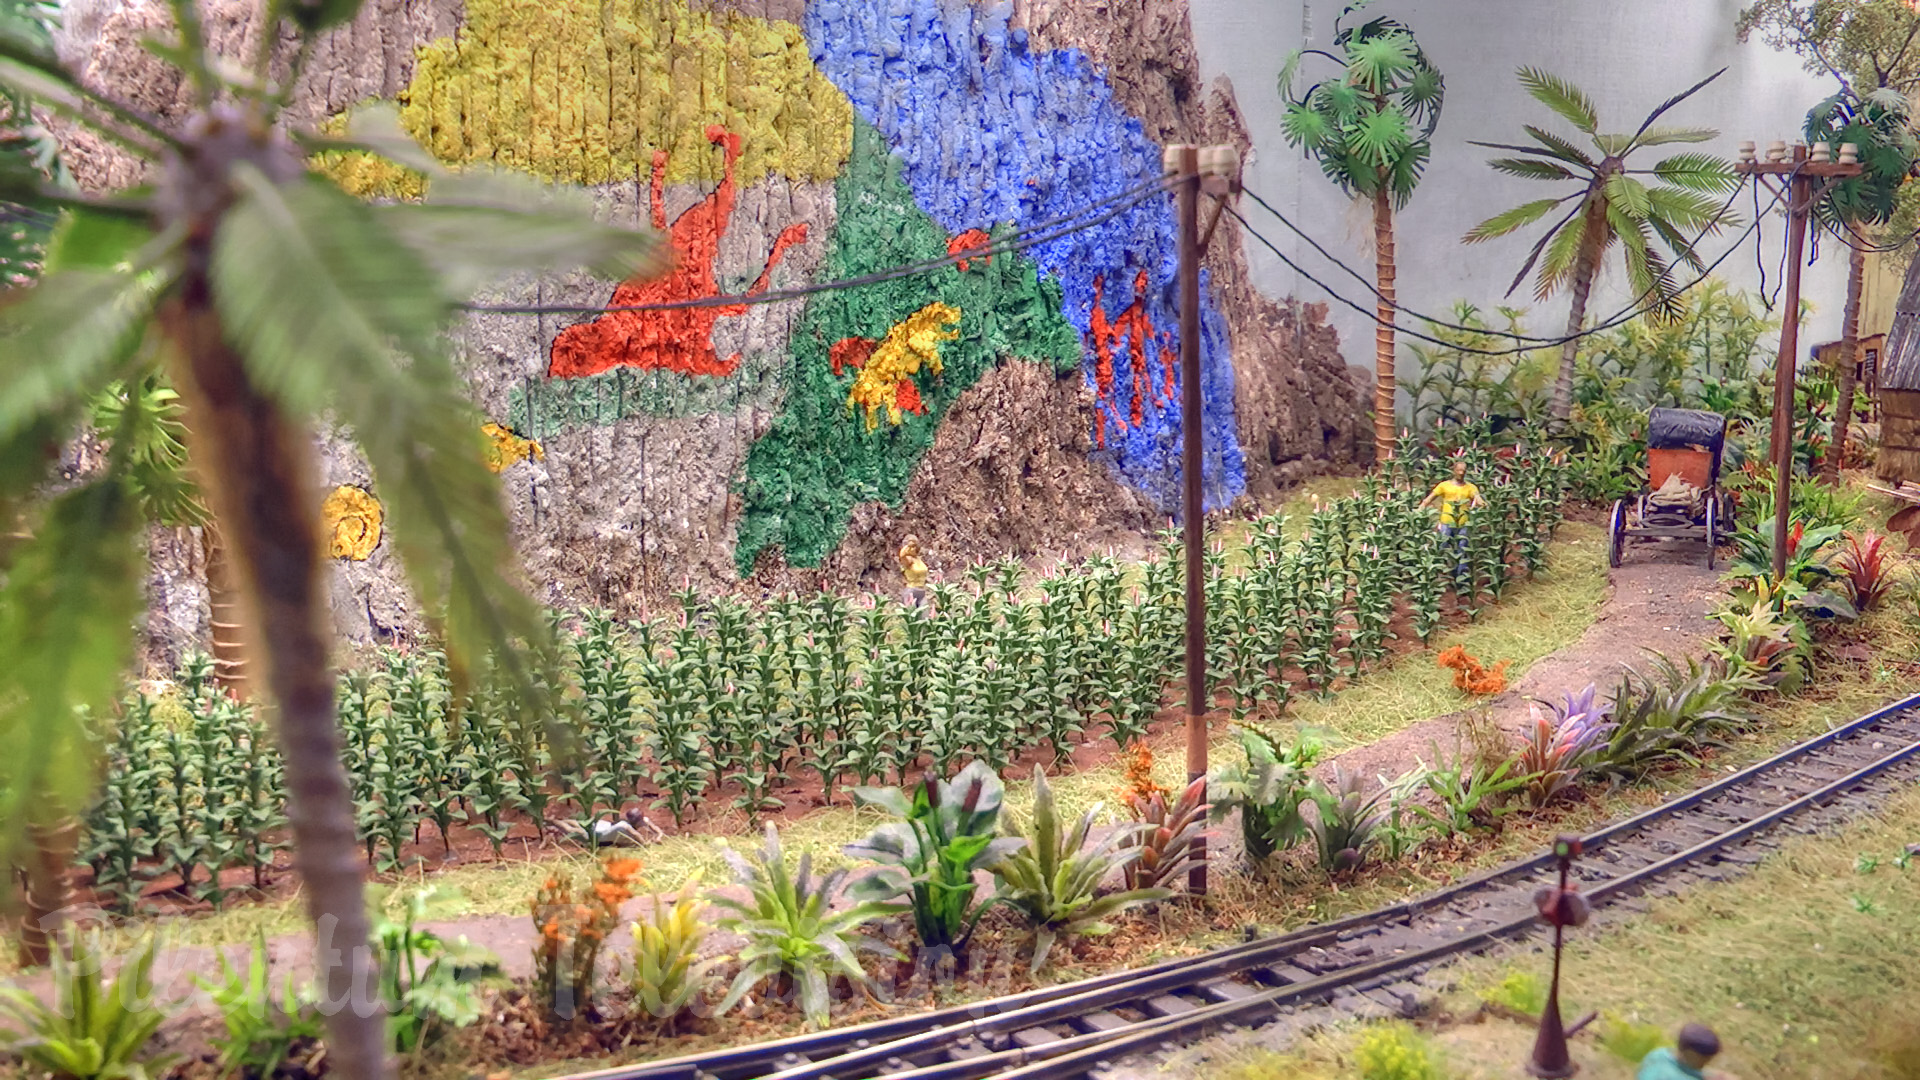 Model Railroad Diorama of Cuba - Scratch Building and Railway Modelling at its Best - On30 Layouts